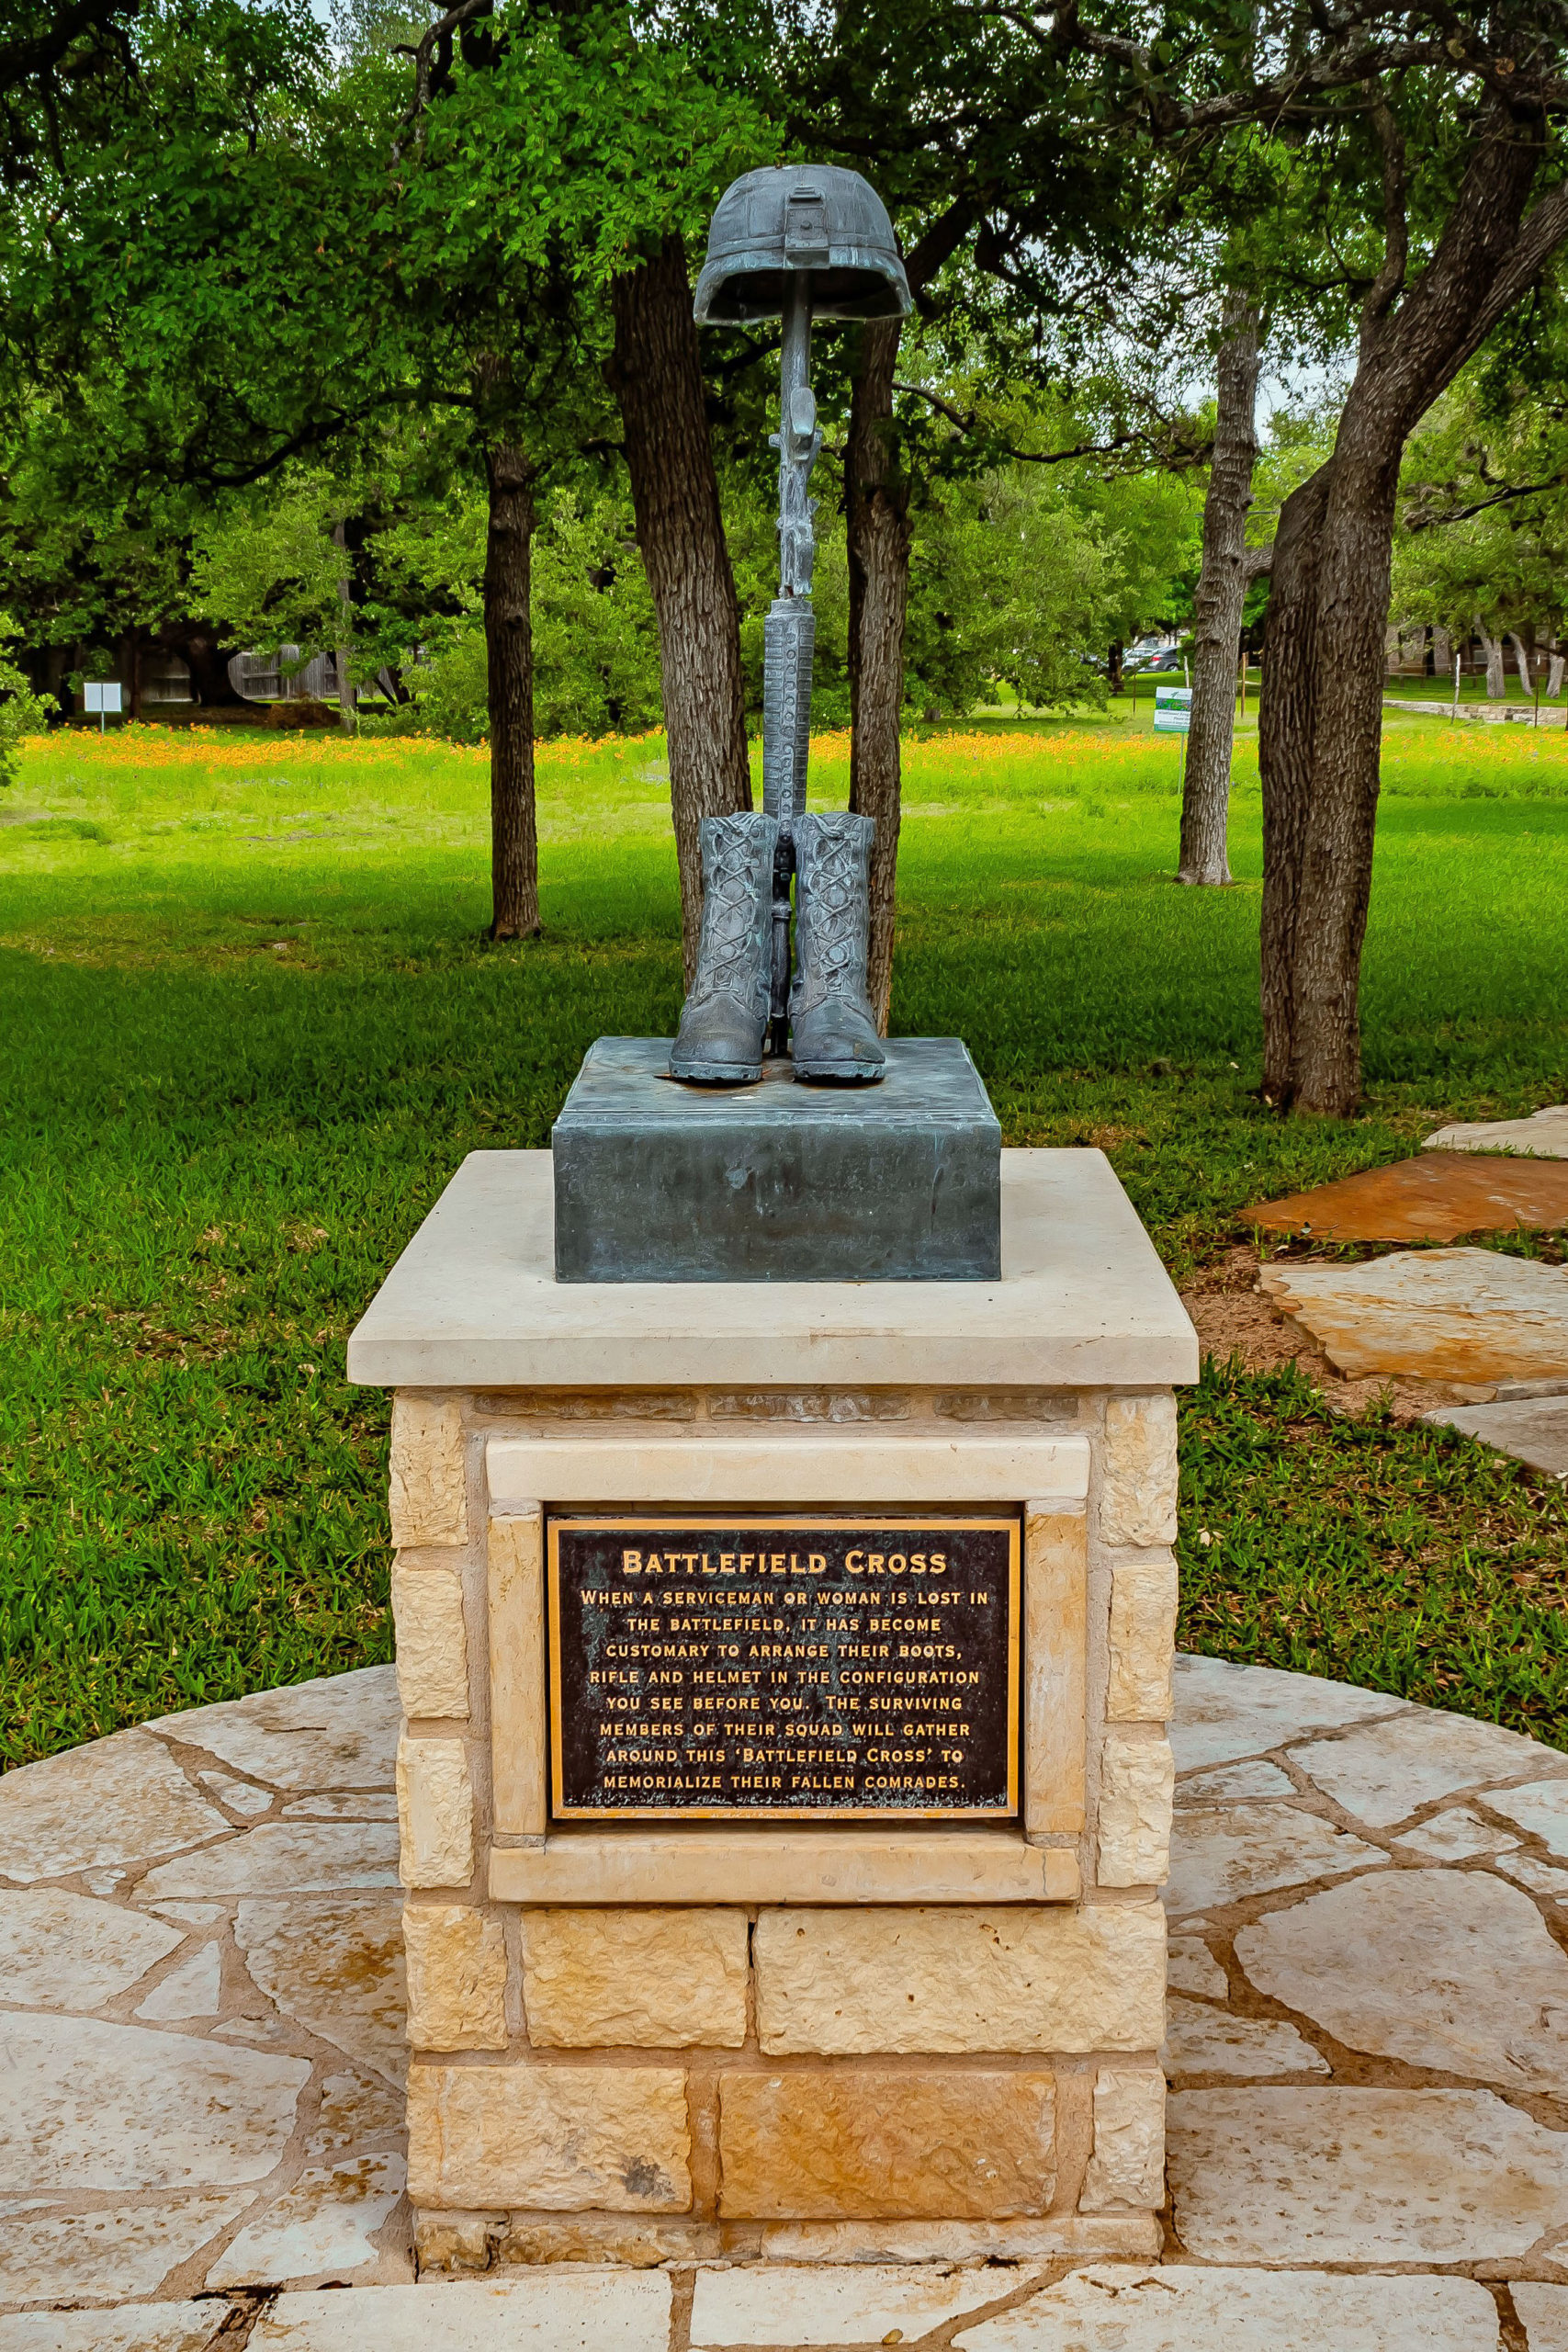 Picture of the Battlefield Cross statue.